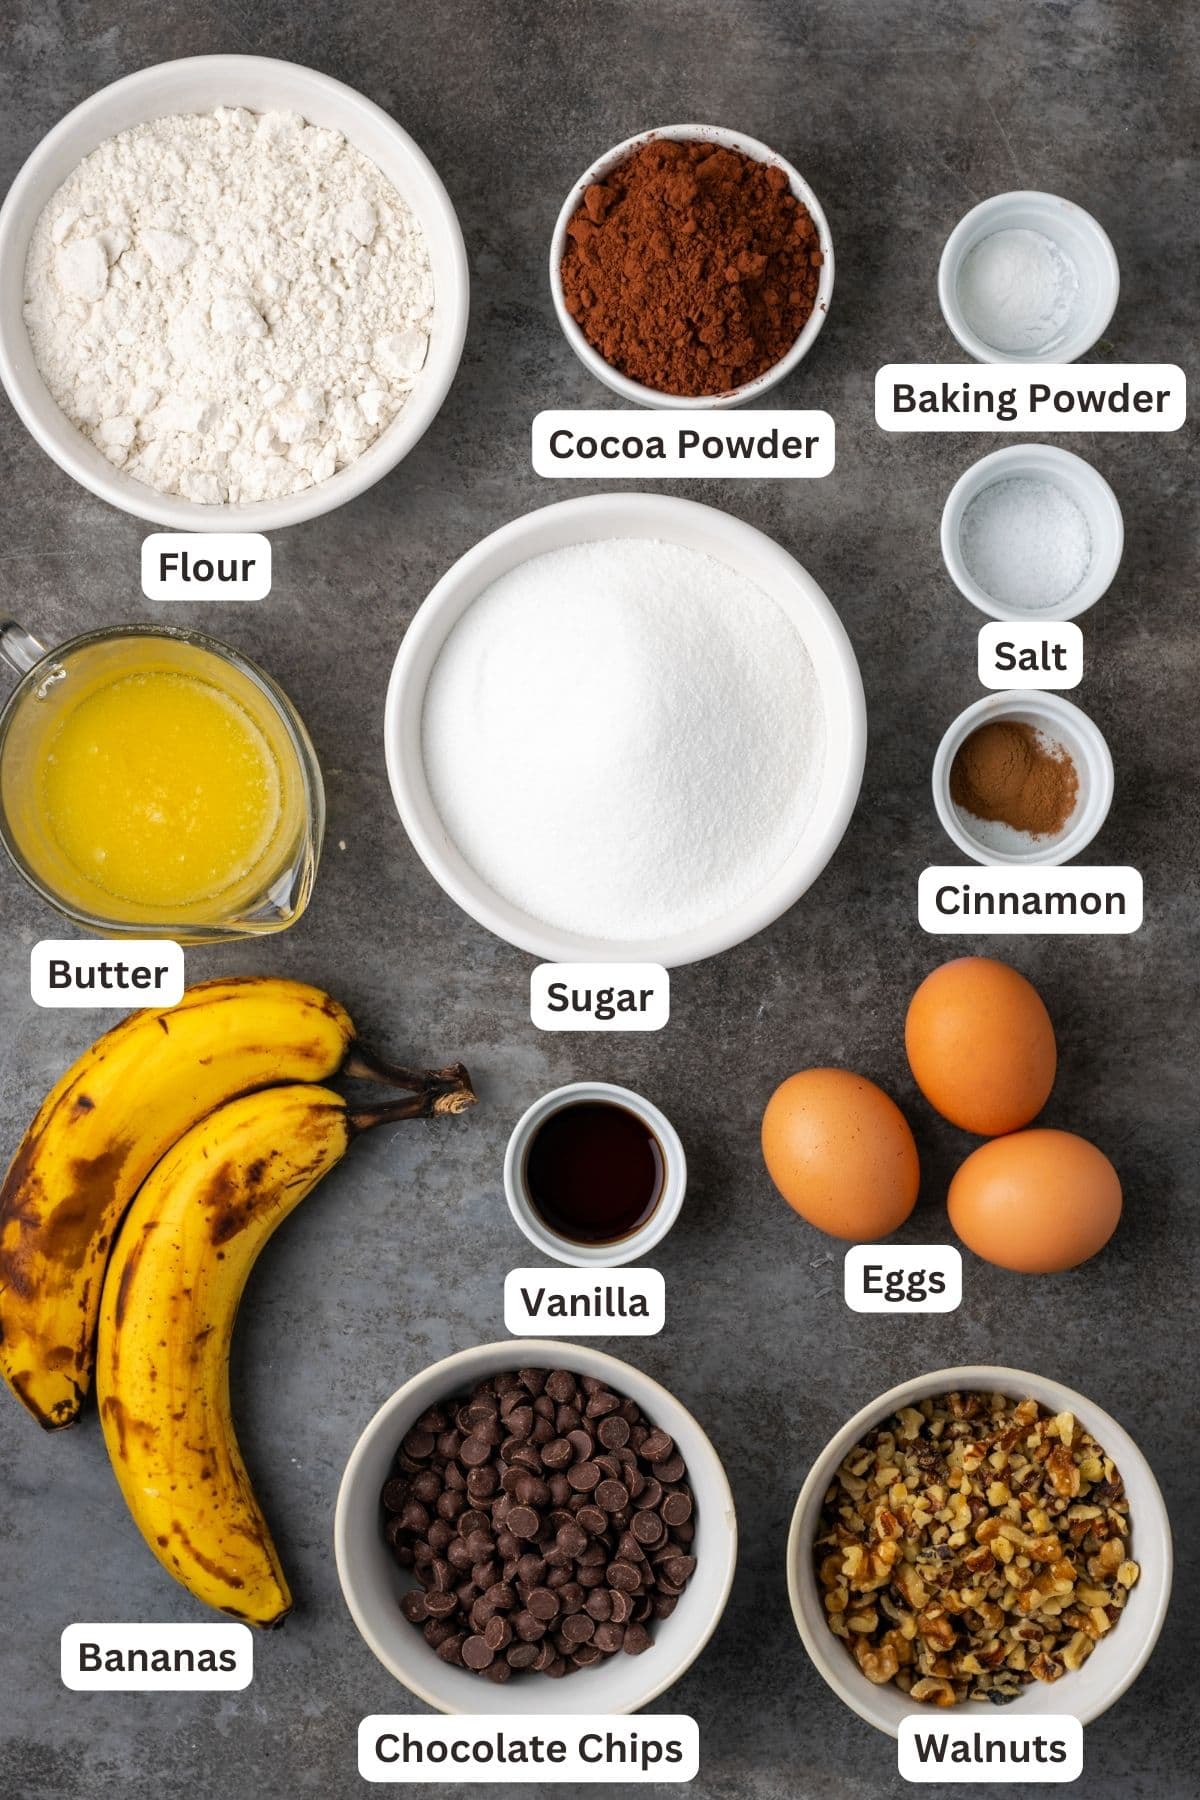 Ingredients for banana bread brownies with text labels overlaying each ingredient.